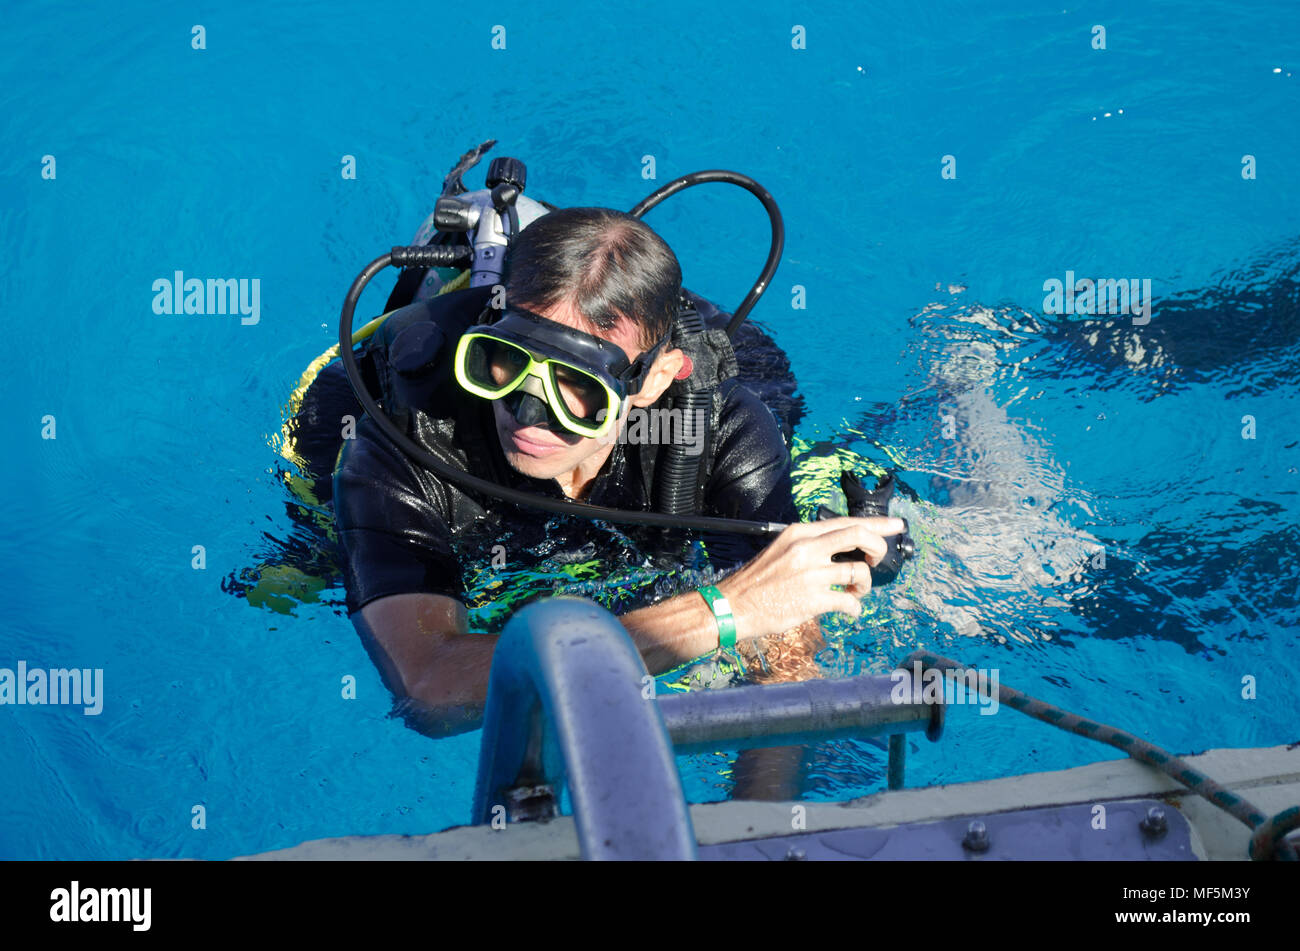 A man with an aqualung floats in the blue water of the sea Stock Photo